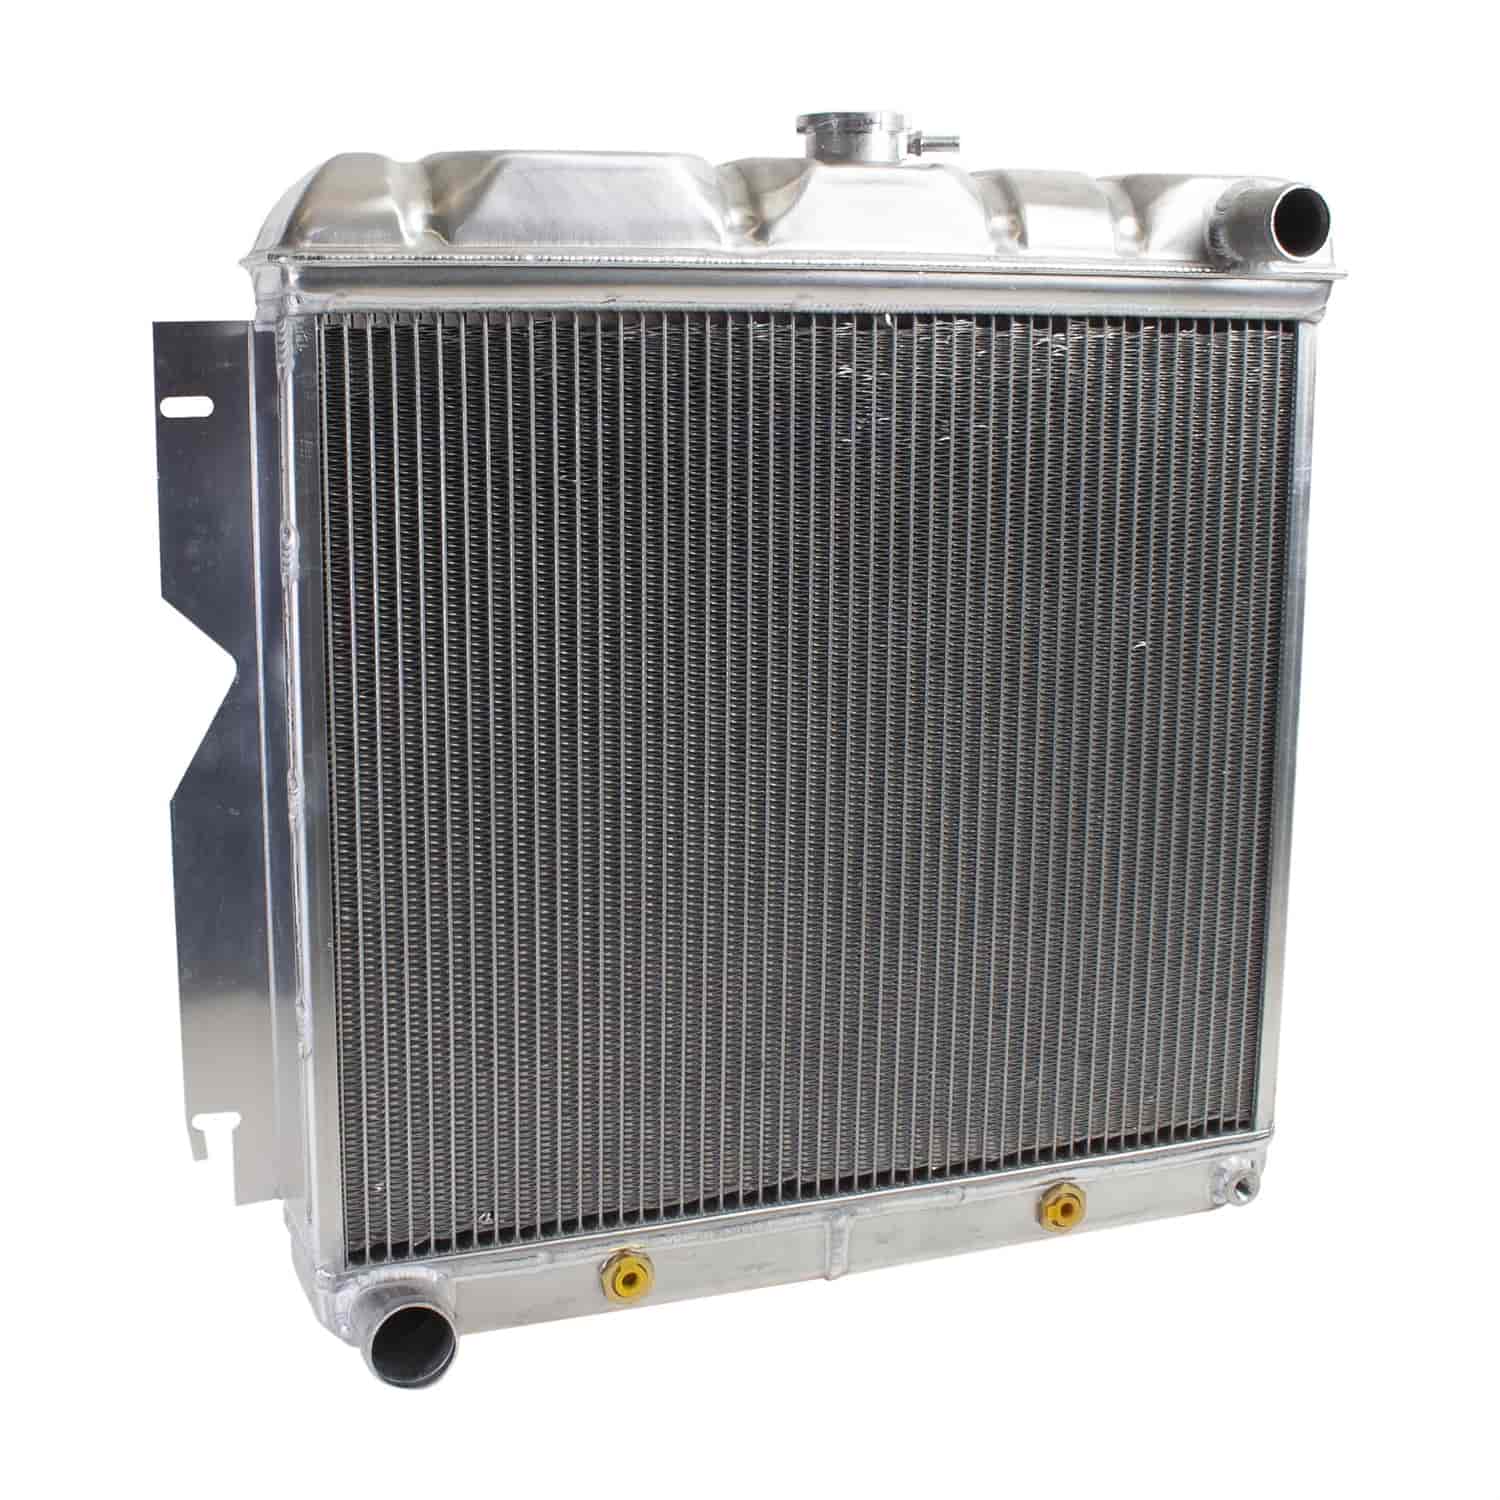 ExactFit Radiator for 1962-1965 Belvedere, Fury, and Sport